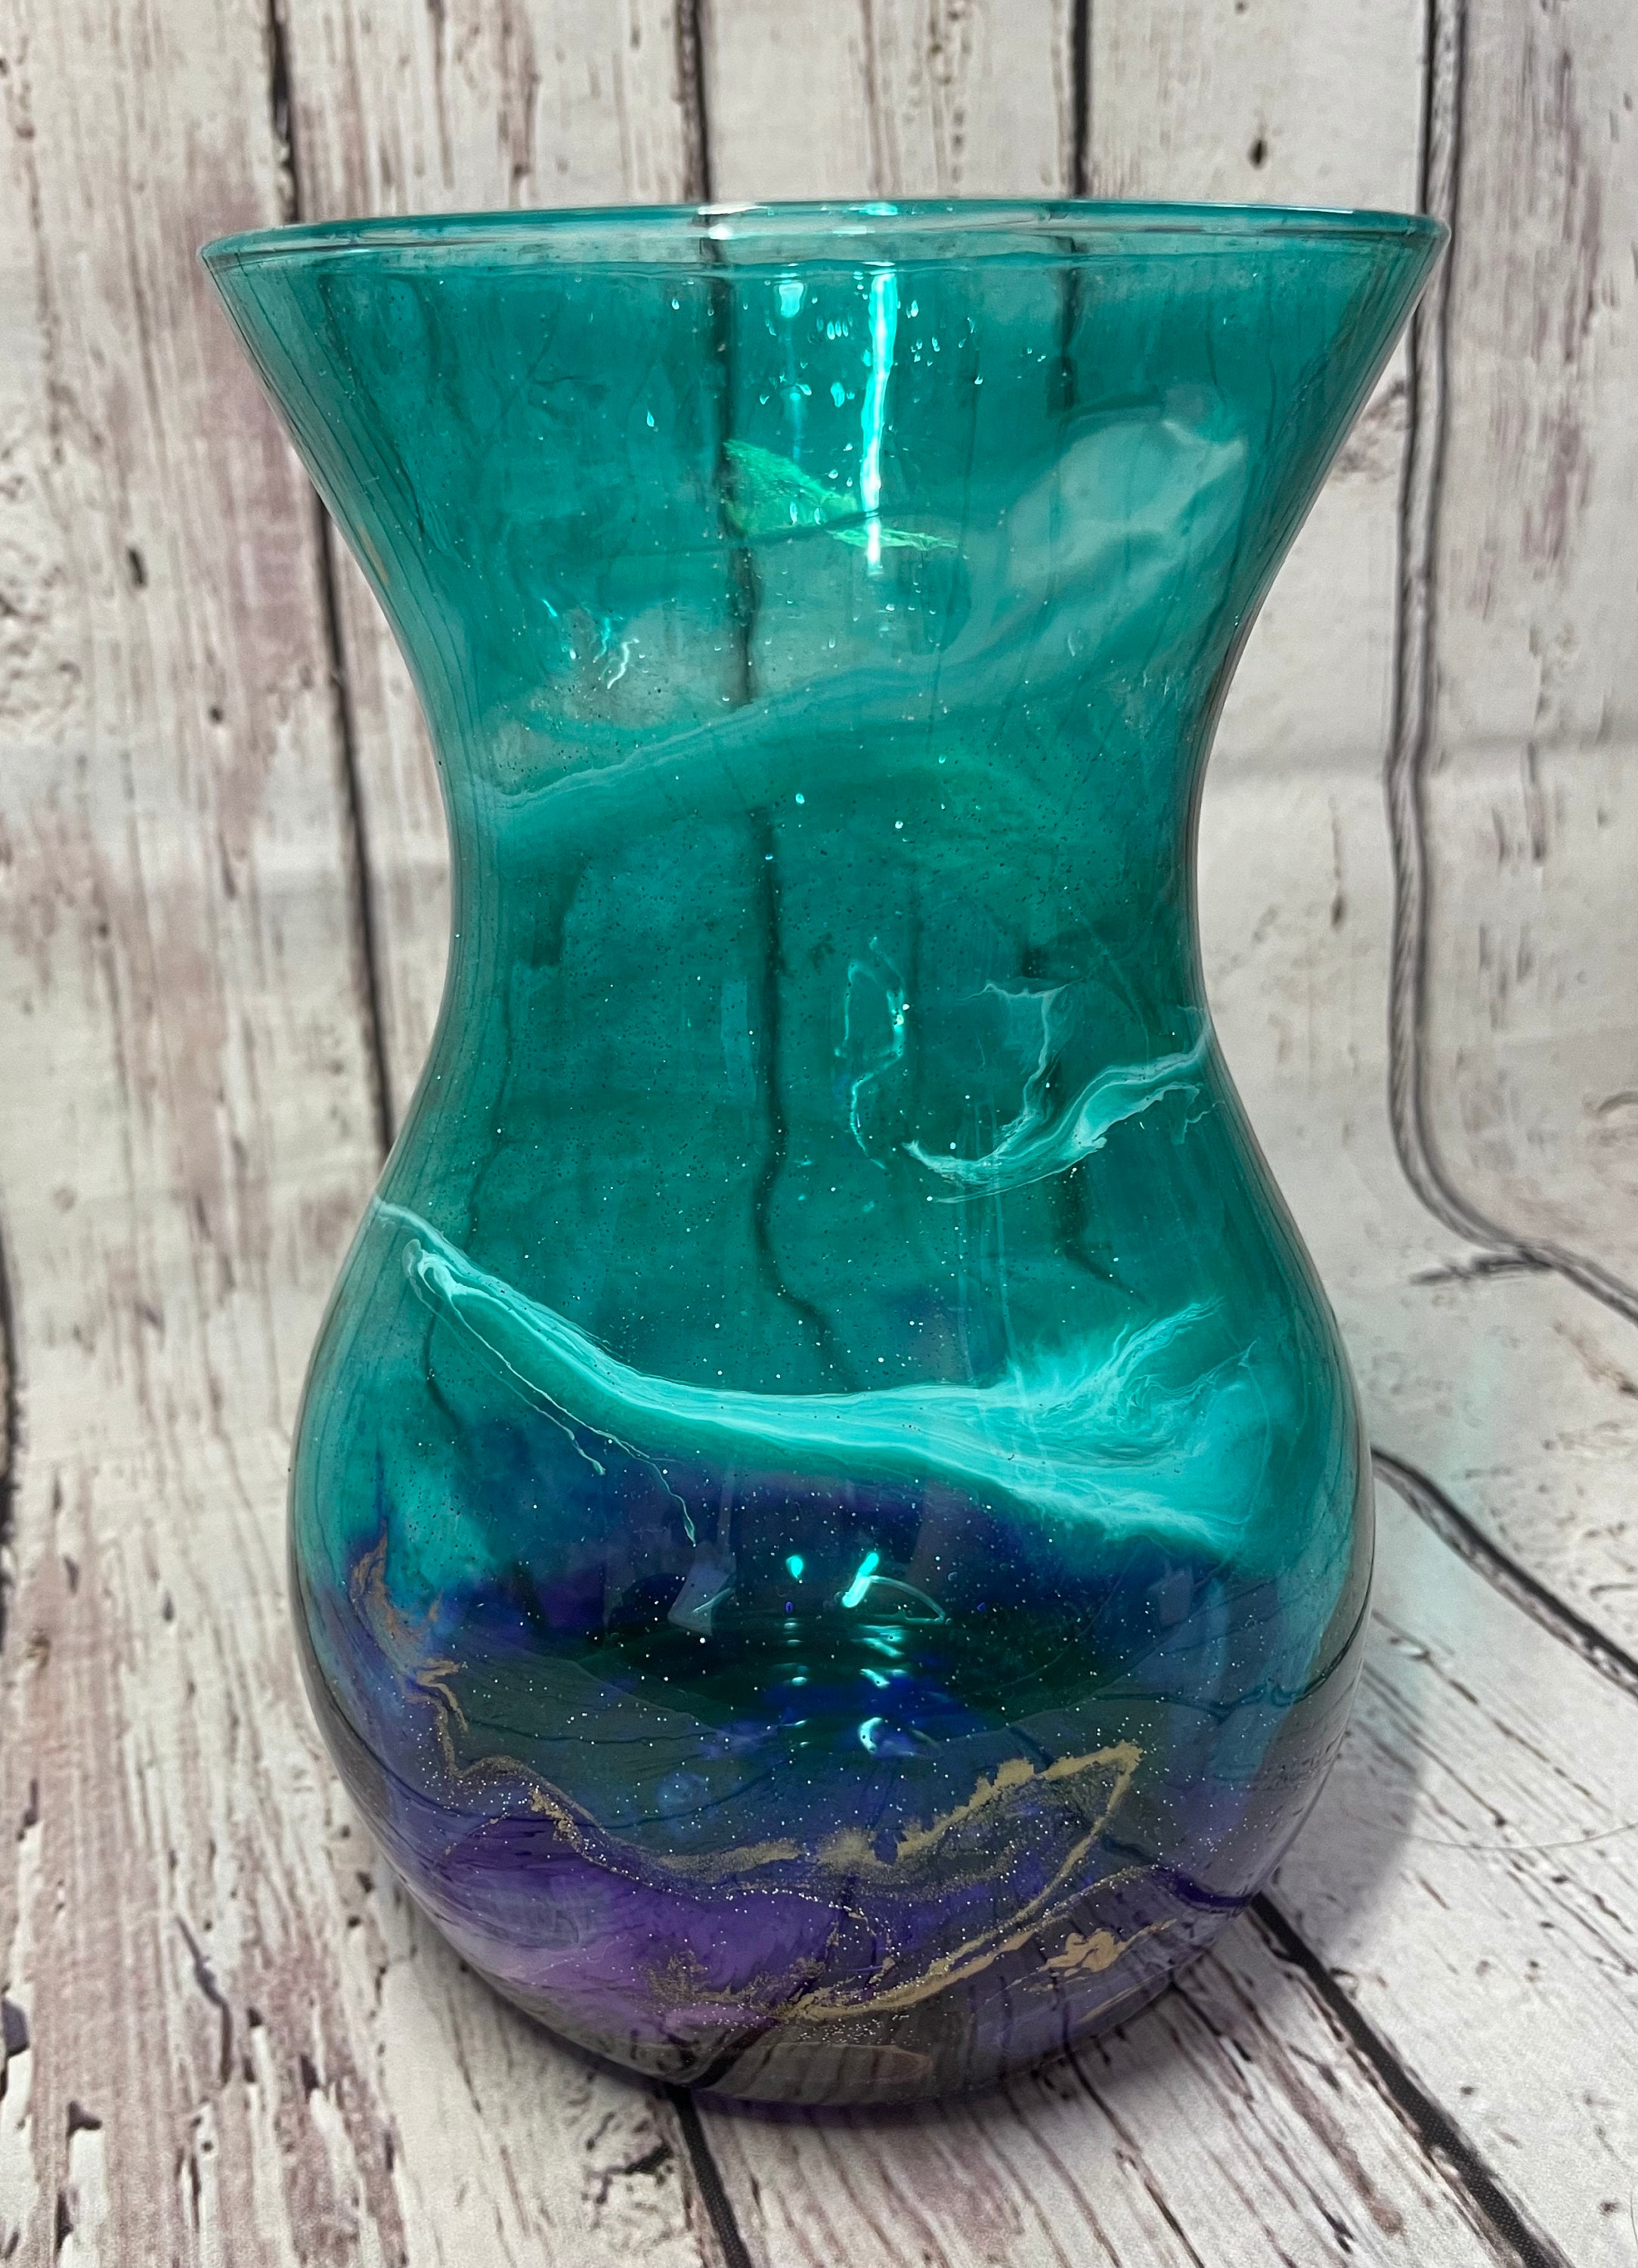 Teal and Turquoise Glass Flowers With Vase 